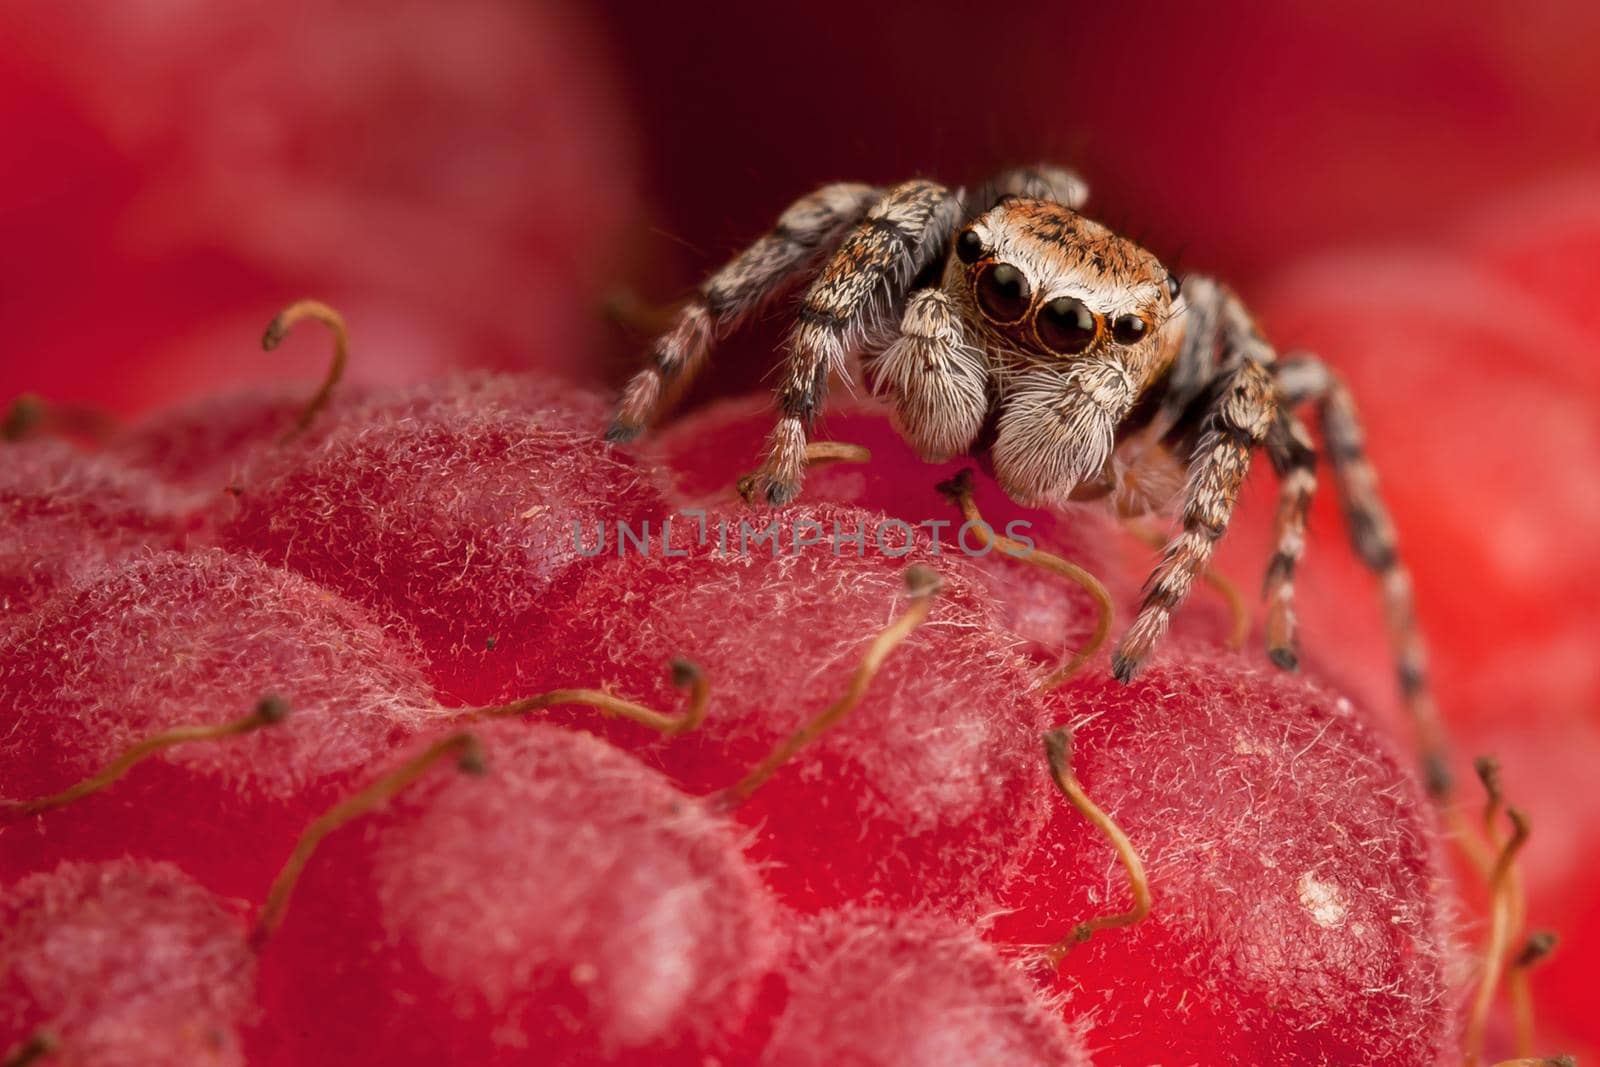 Jumping spider and raspberry by Lincikas